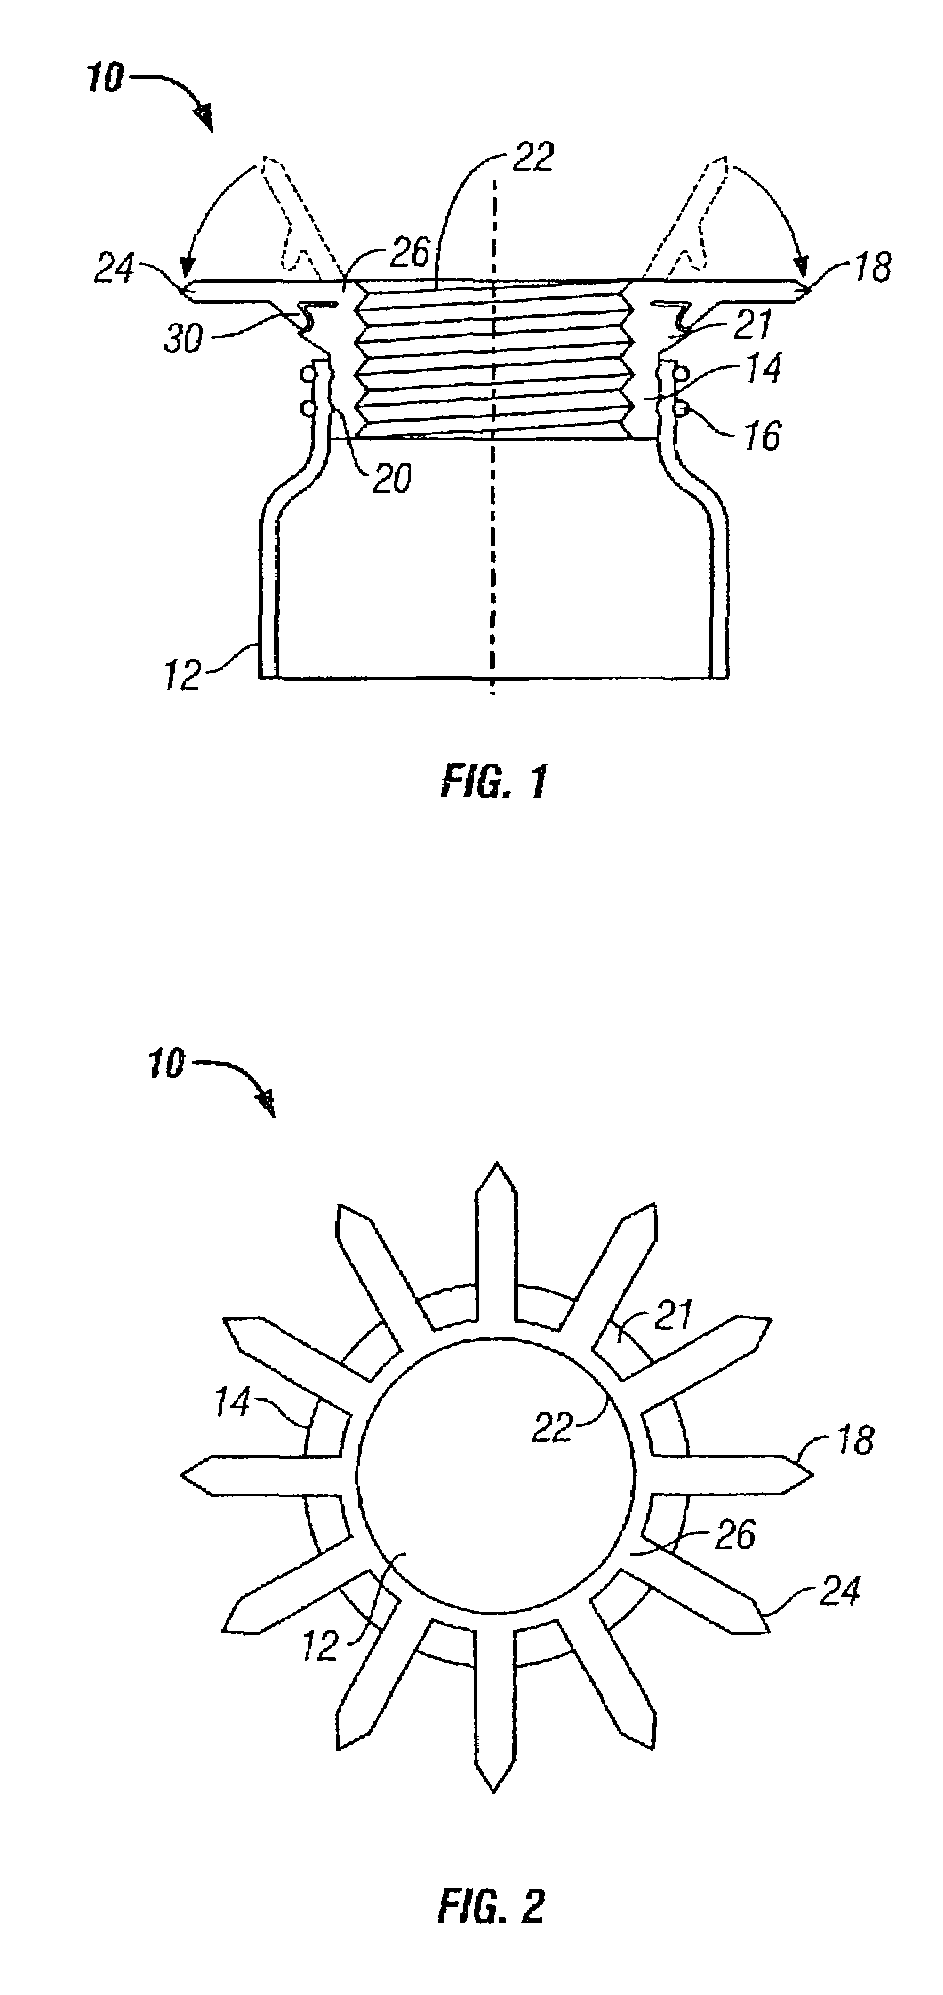 Perorally insertable/removable anti-reflux valve